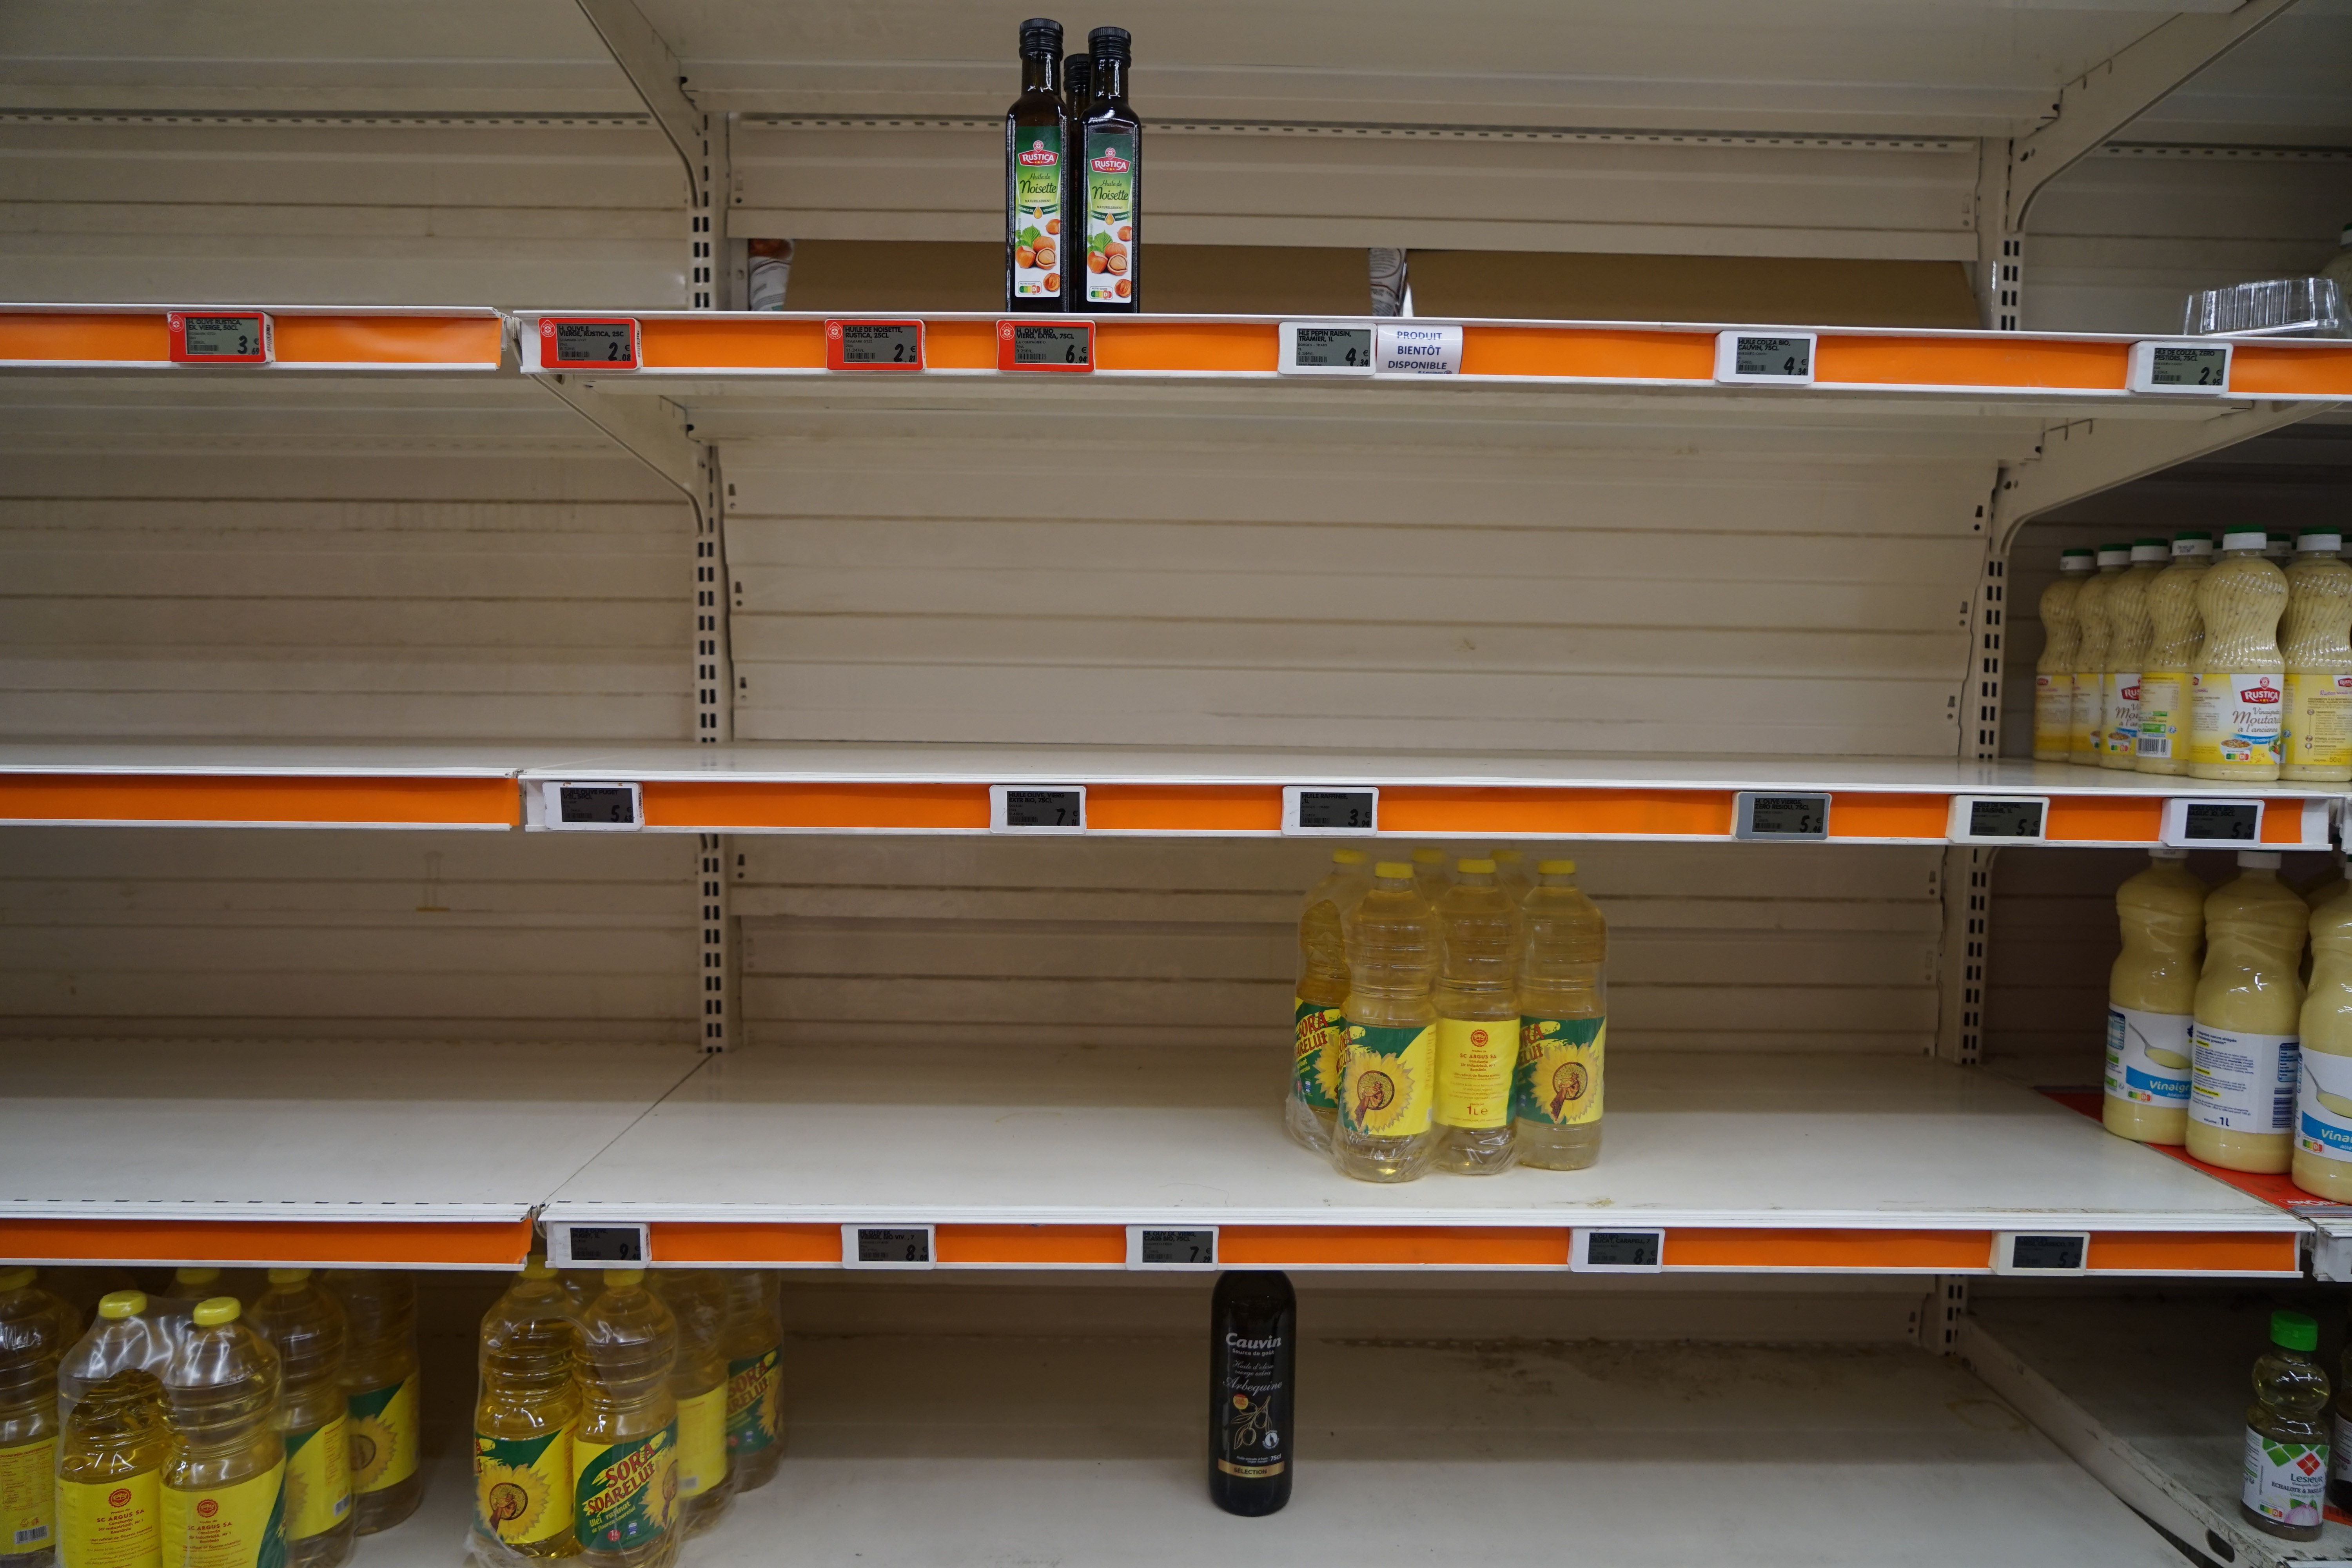 France, Pantin, le 2022/05/14. In the supermarket shelves there is a great shortage of oil, especially rapeseed and sunflower. Here in this shop only one oil of a completely unknown brand is sold. The side aisle is empty. Photography by Myriam Tirler / Hans Lucas. France, Pantin, le 2022/05/14. Dans les rayons des supermarches on constate une forte penurie d huile, notamment colza et tournesol. Ici dans ce magasin n est vendu qu une seule huile d une marque totalement inconnue. Le rayon annexe est vide. Photographie de Myriam Tirler / Hans Lucas.